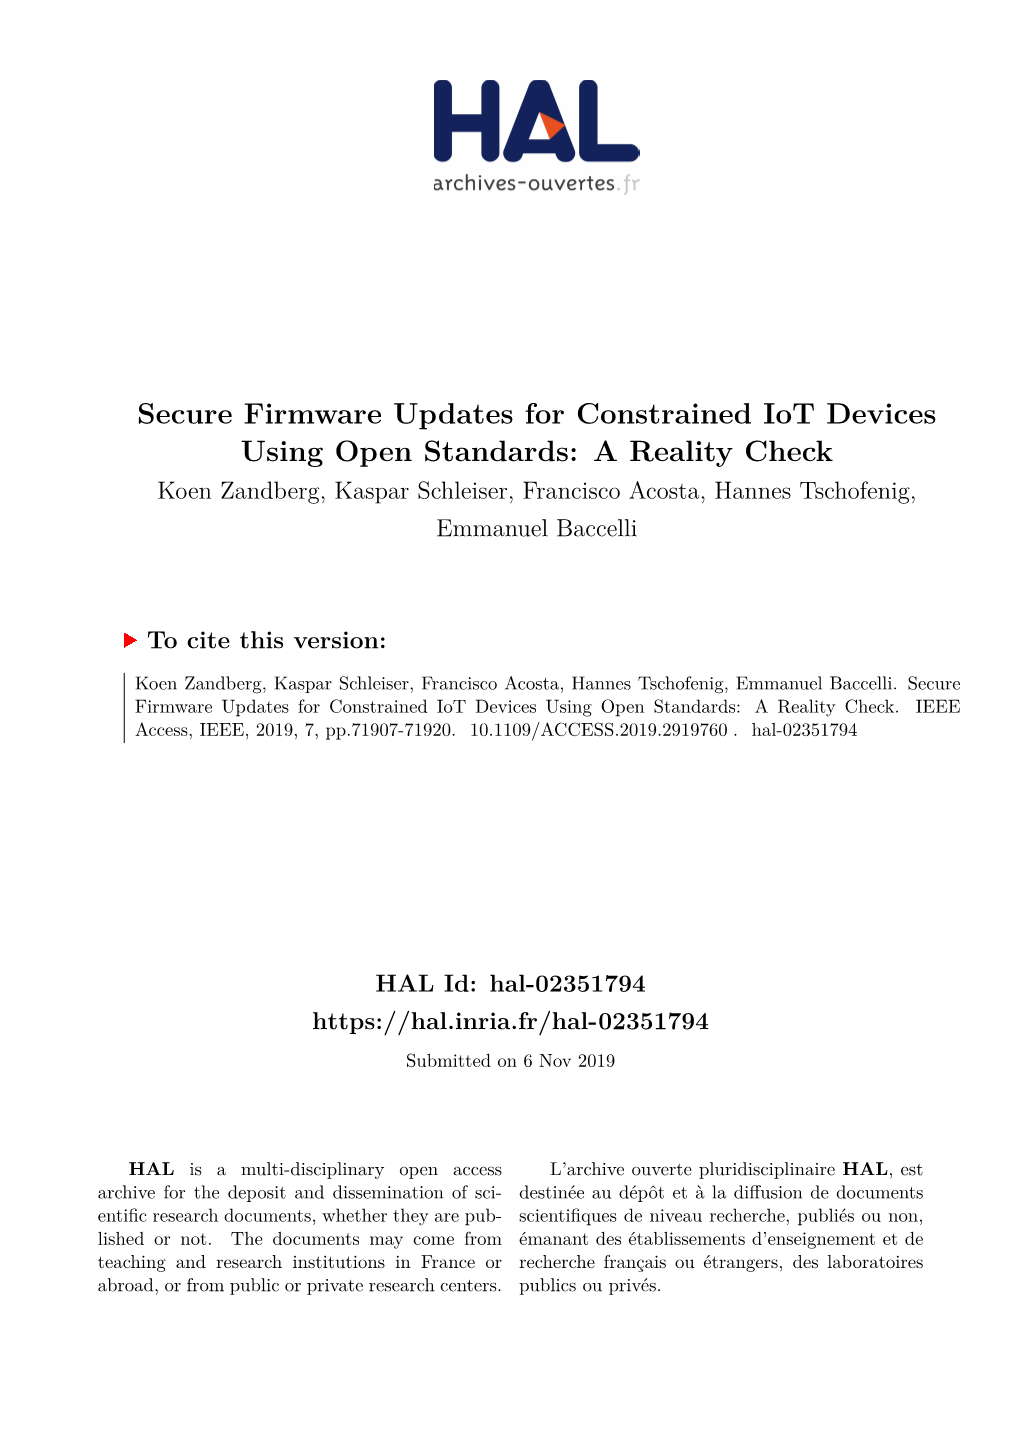 Secure Firmware Updates for Constrained Iot Devices